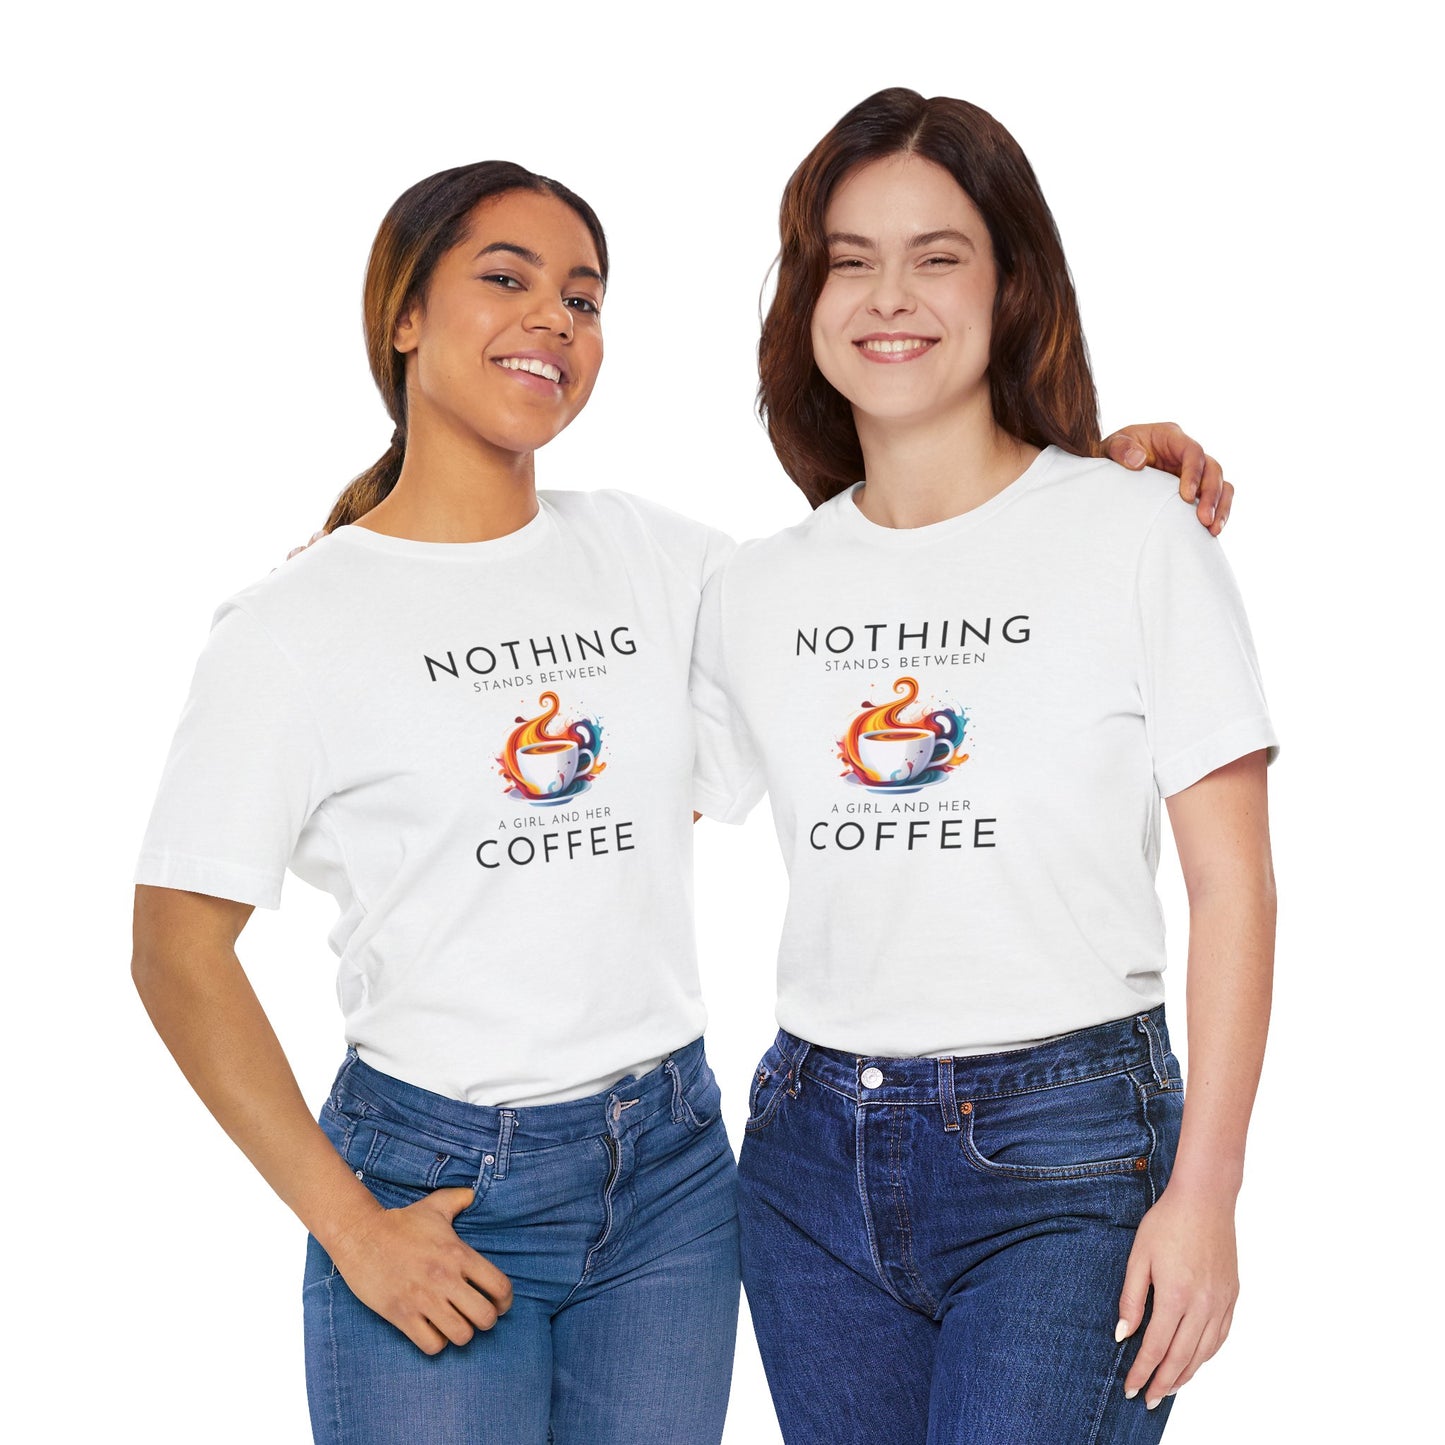 Nothing Stands Between a Girl and Her Coffee - Short Sleeve T-Shirt XS-5XL